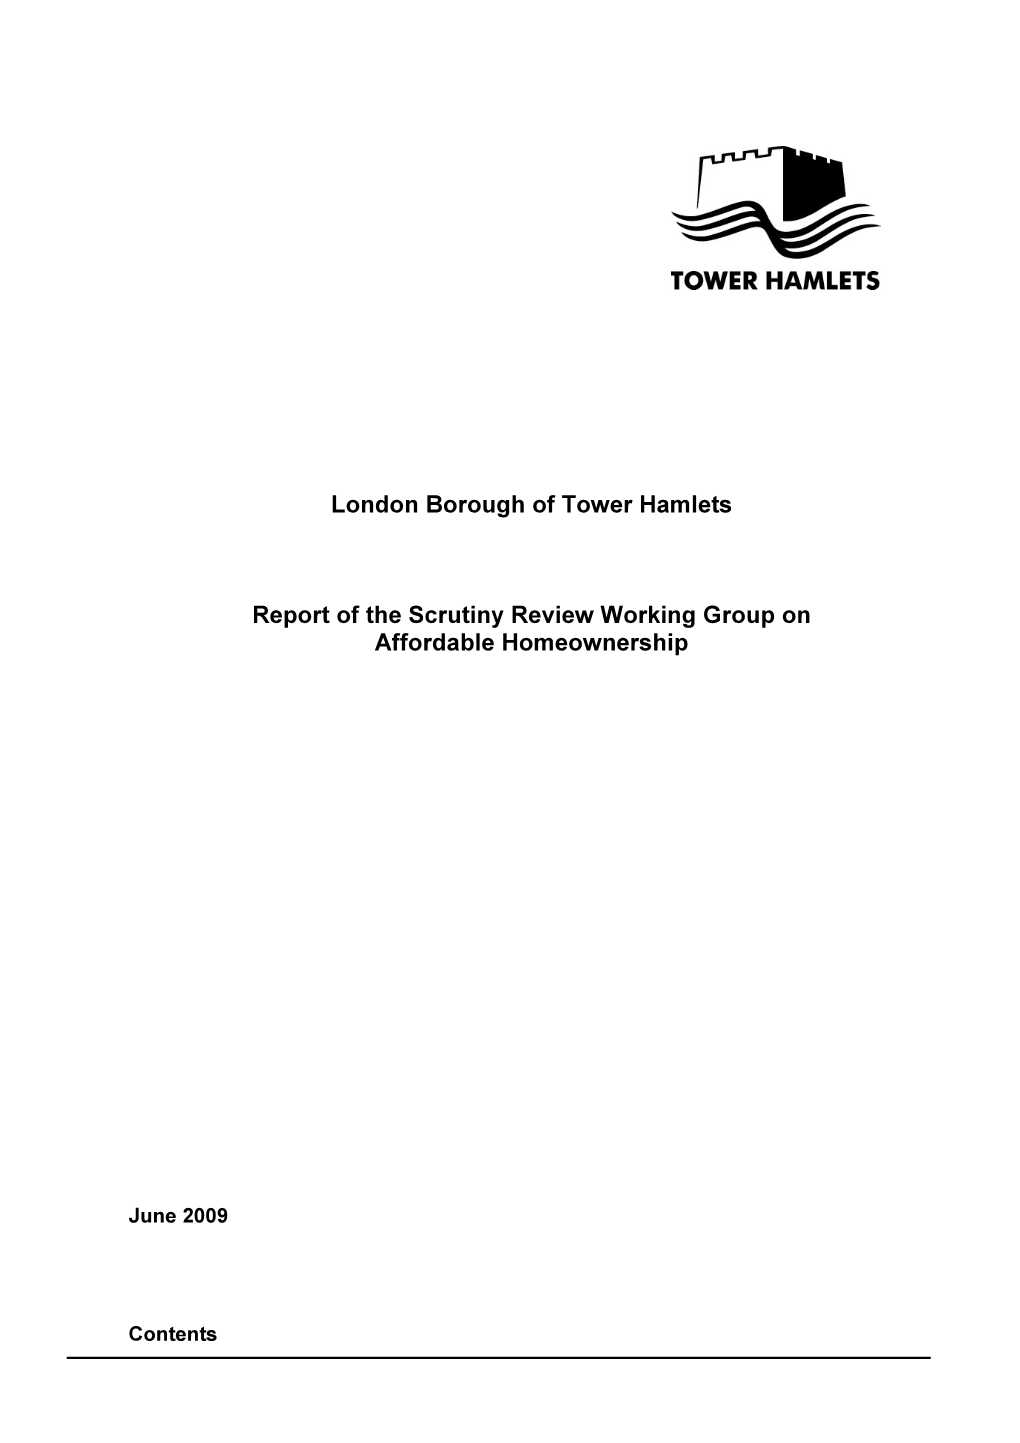 London Borough of Tower Hamlets Report of the Scrutiny Review